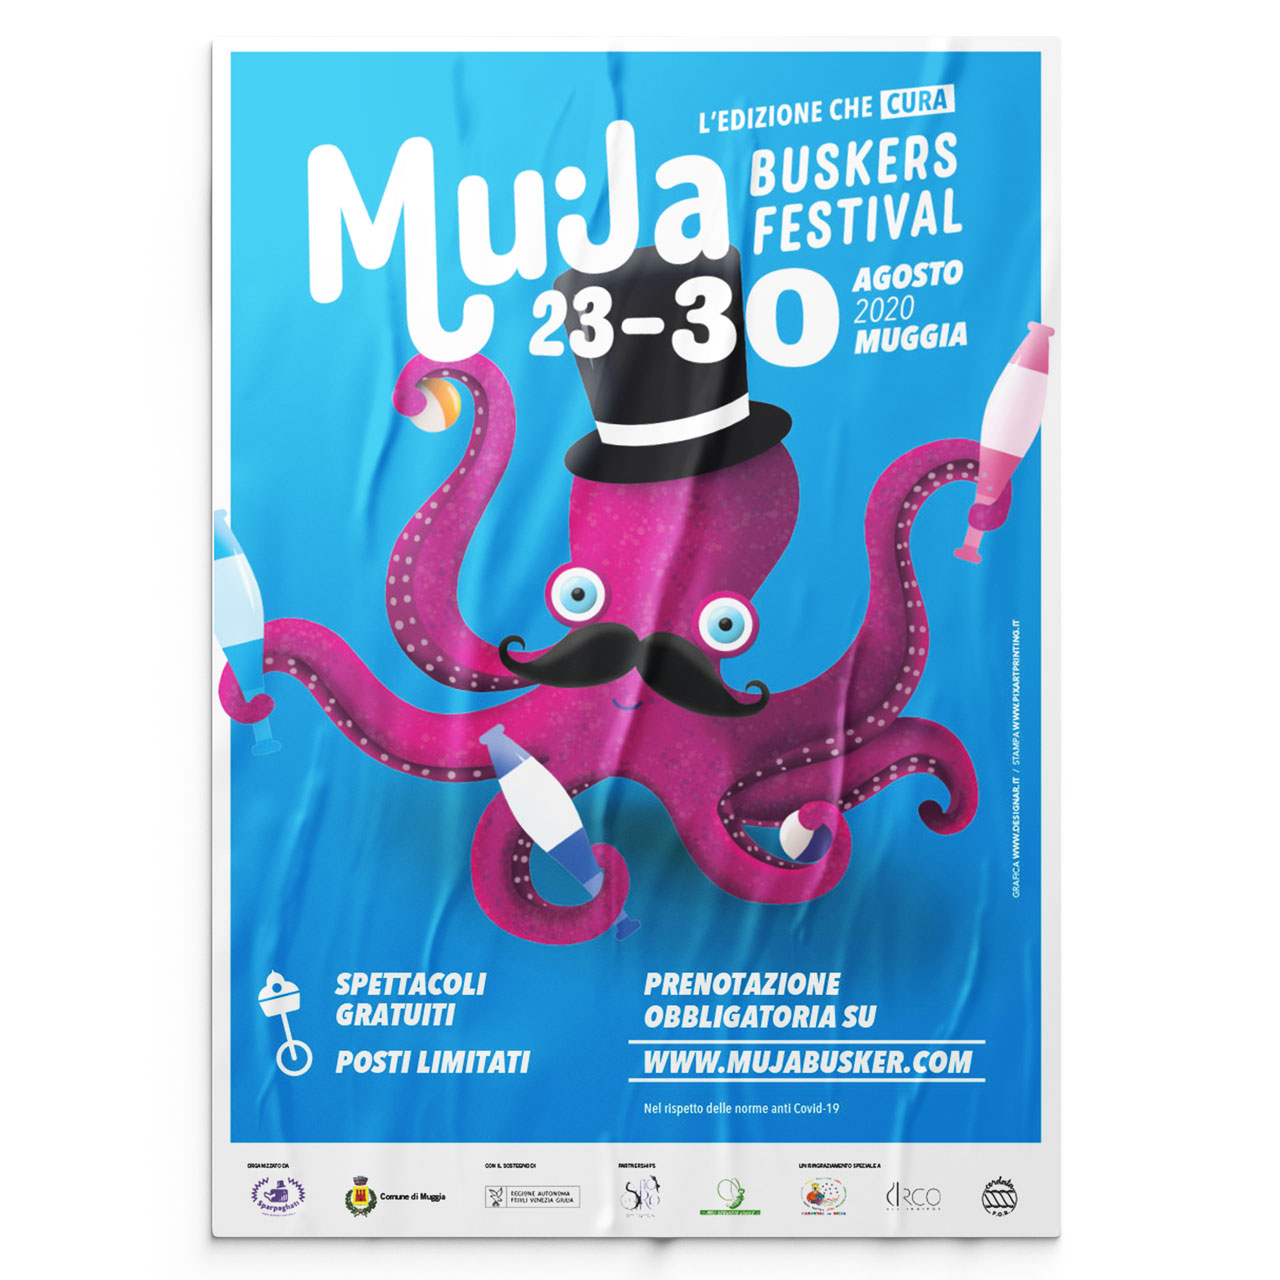 Muja Buskers Festival poster